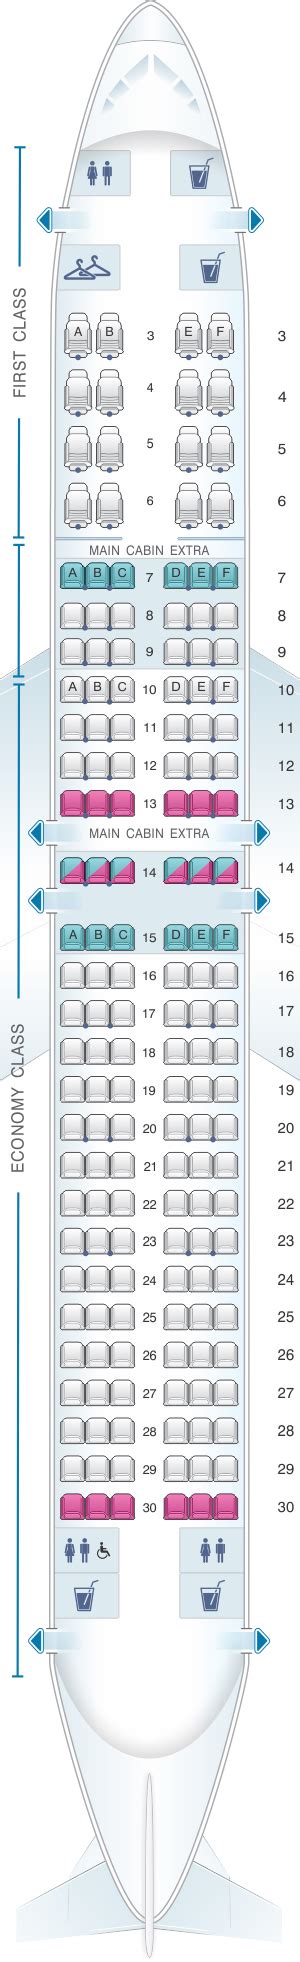 Seats 186. Pitch 30-31". Width 17". Recline 3". Travelers aboard China United Airlines's Boeing 737-800 in economy class can expect a functional and cozy environment. Tailored for regional routes and 186 passengers, it offers essential amenities for a comfortable short-haul journey. The crew is attentive, ensuring a satisfactory flight experience.